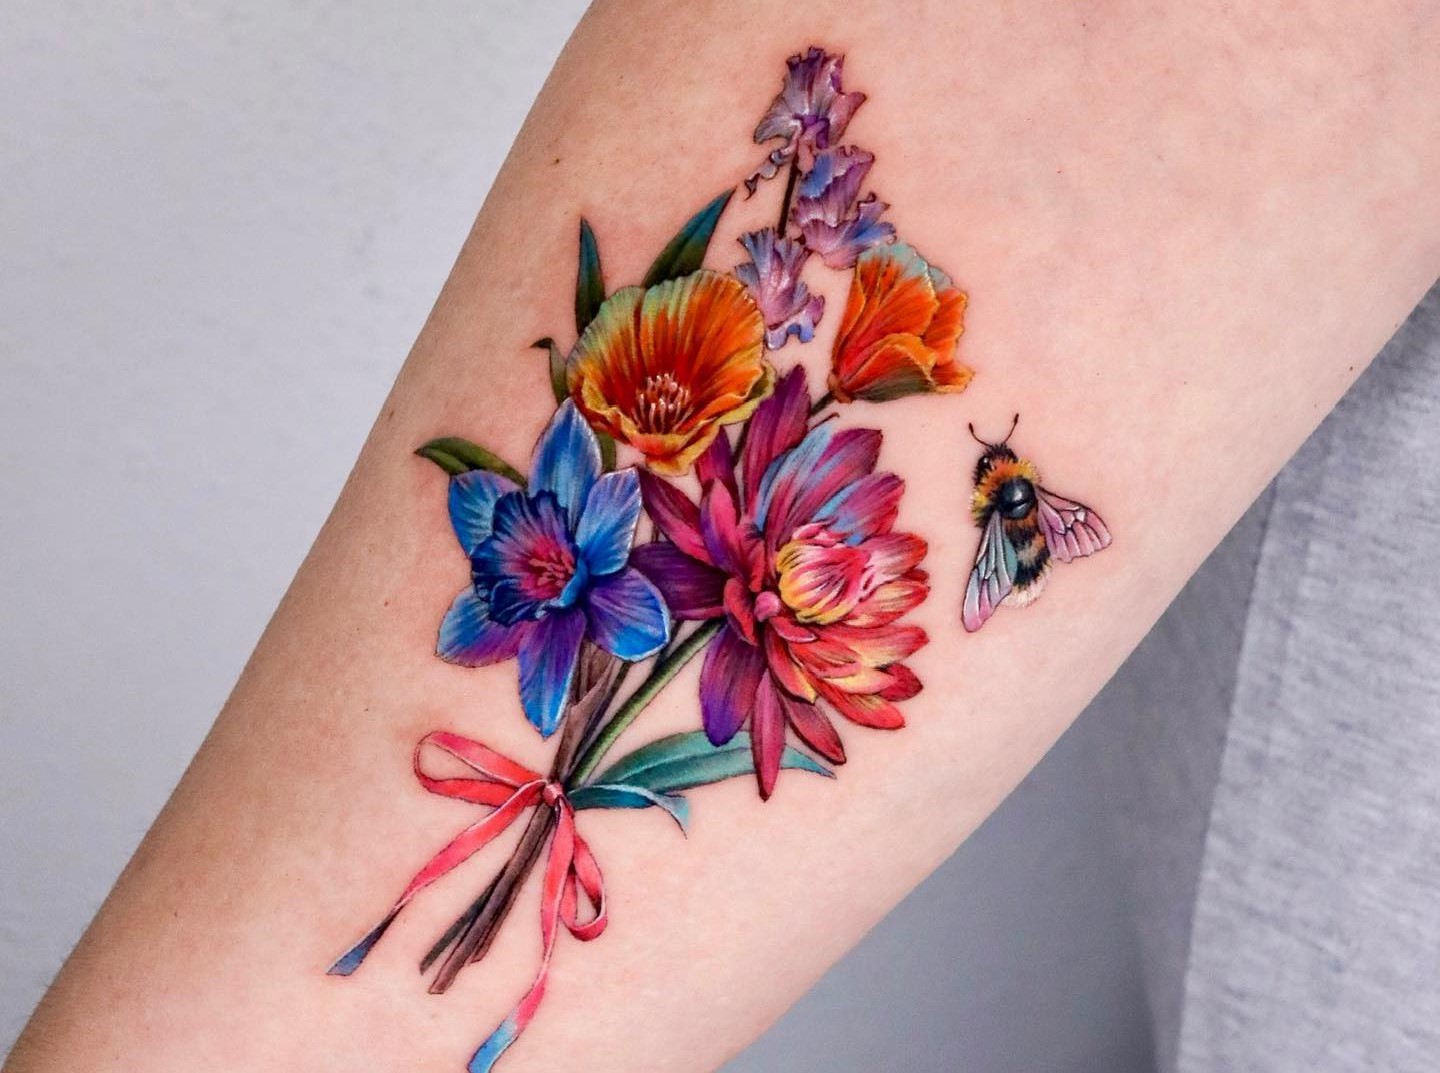 Matching bee and daisy flower tattoo for best friends